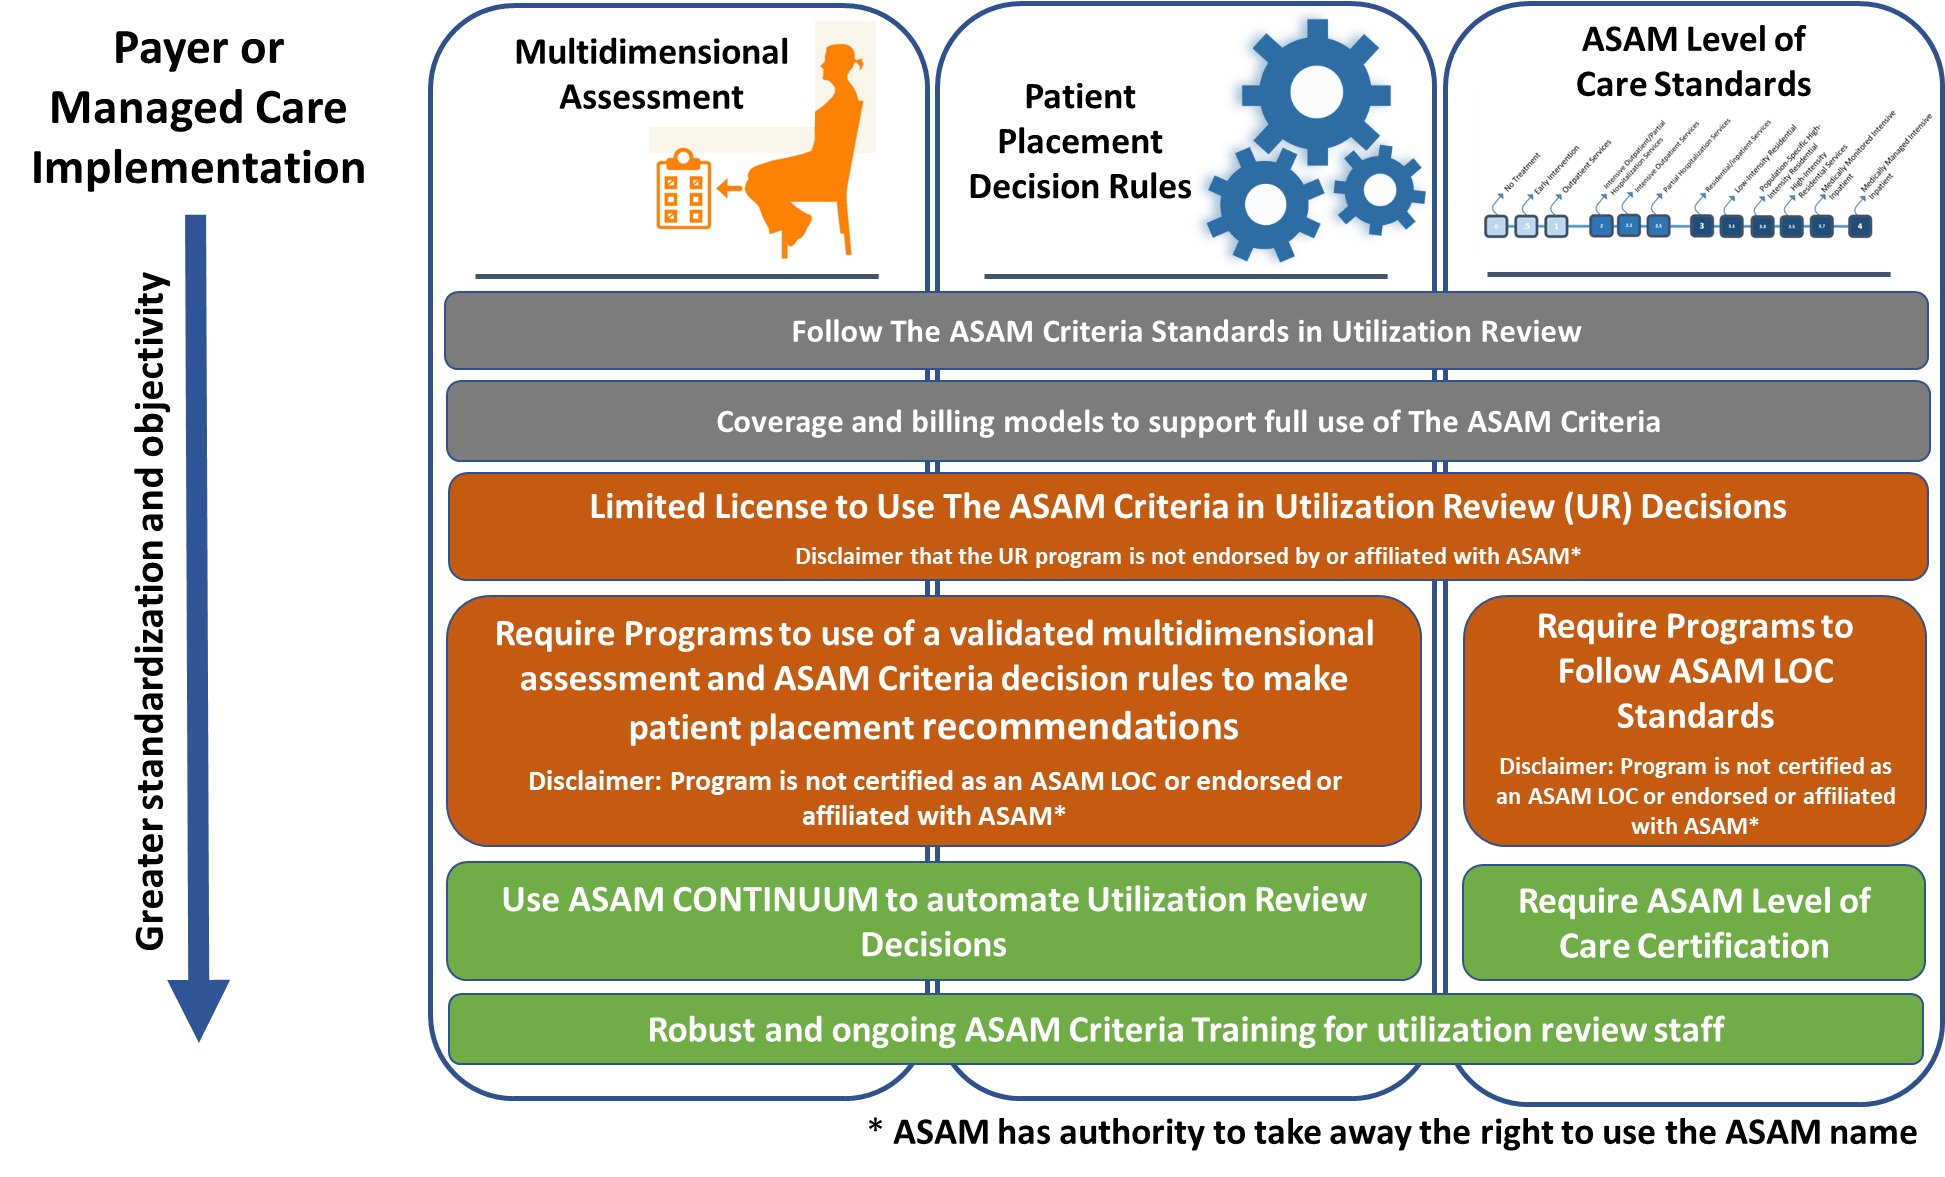 The ASAM Criteria Payer or Managed Care Implementation